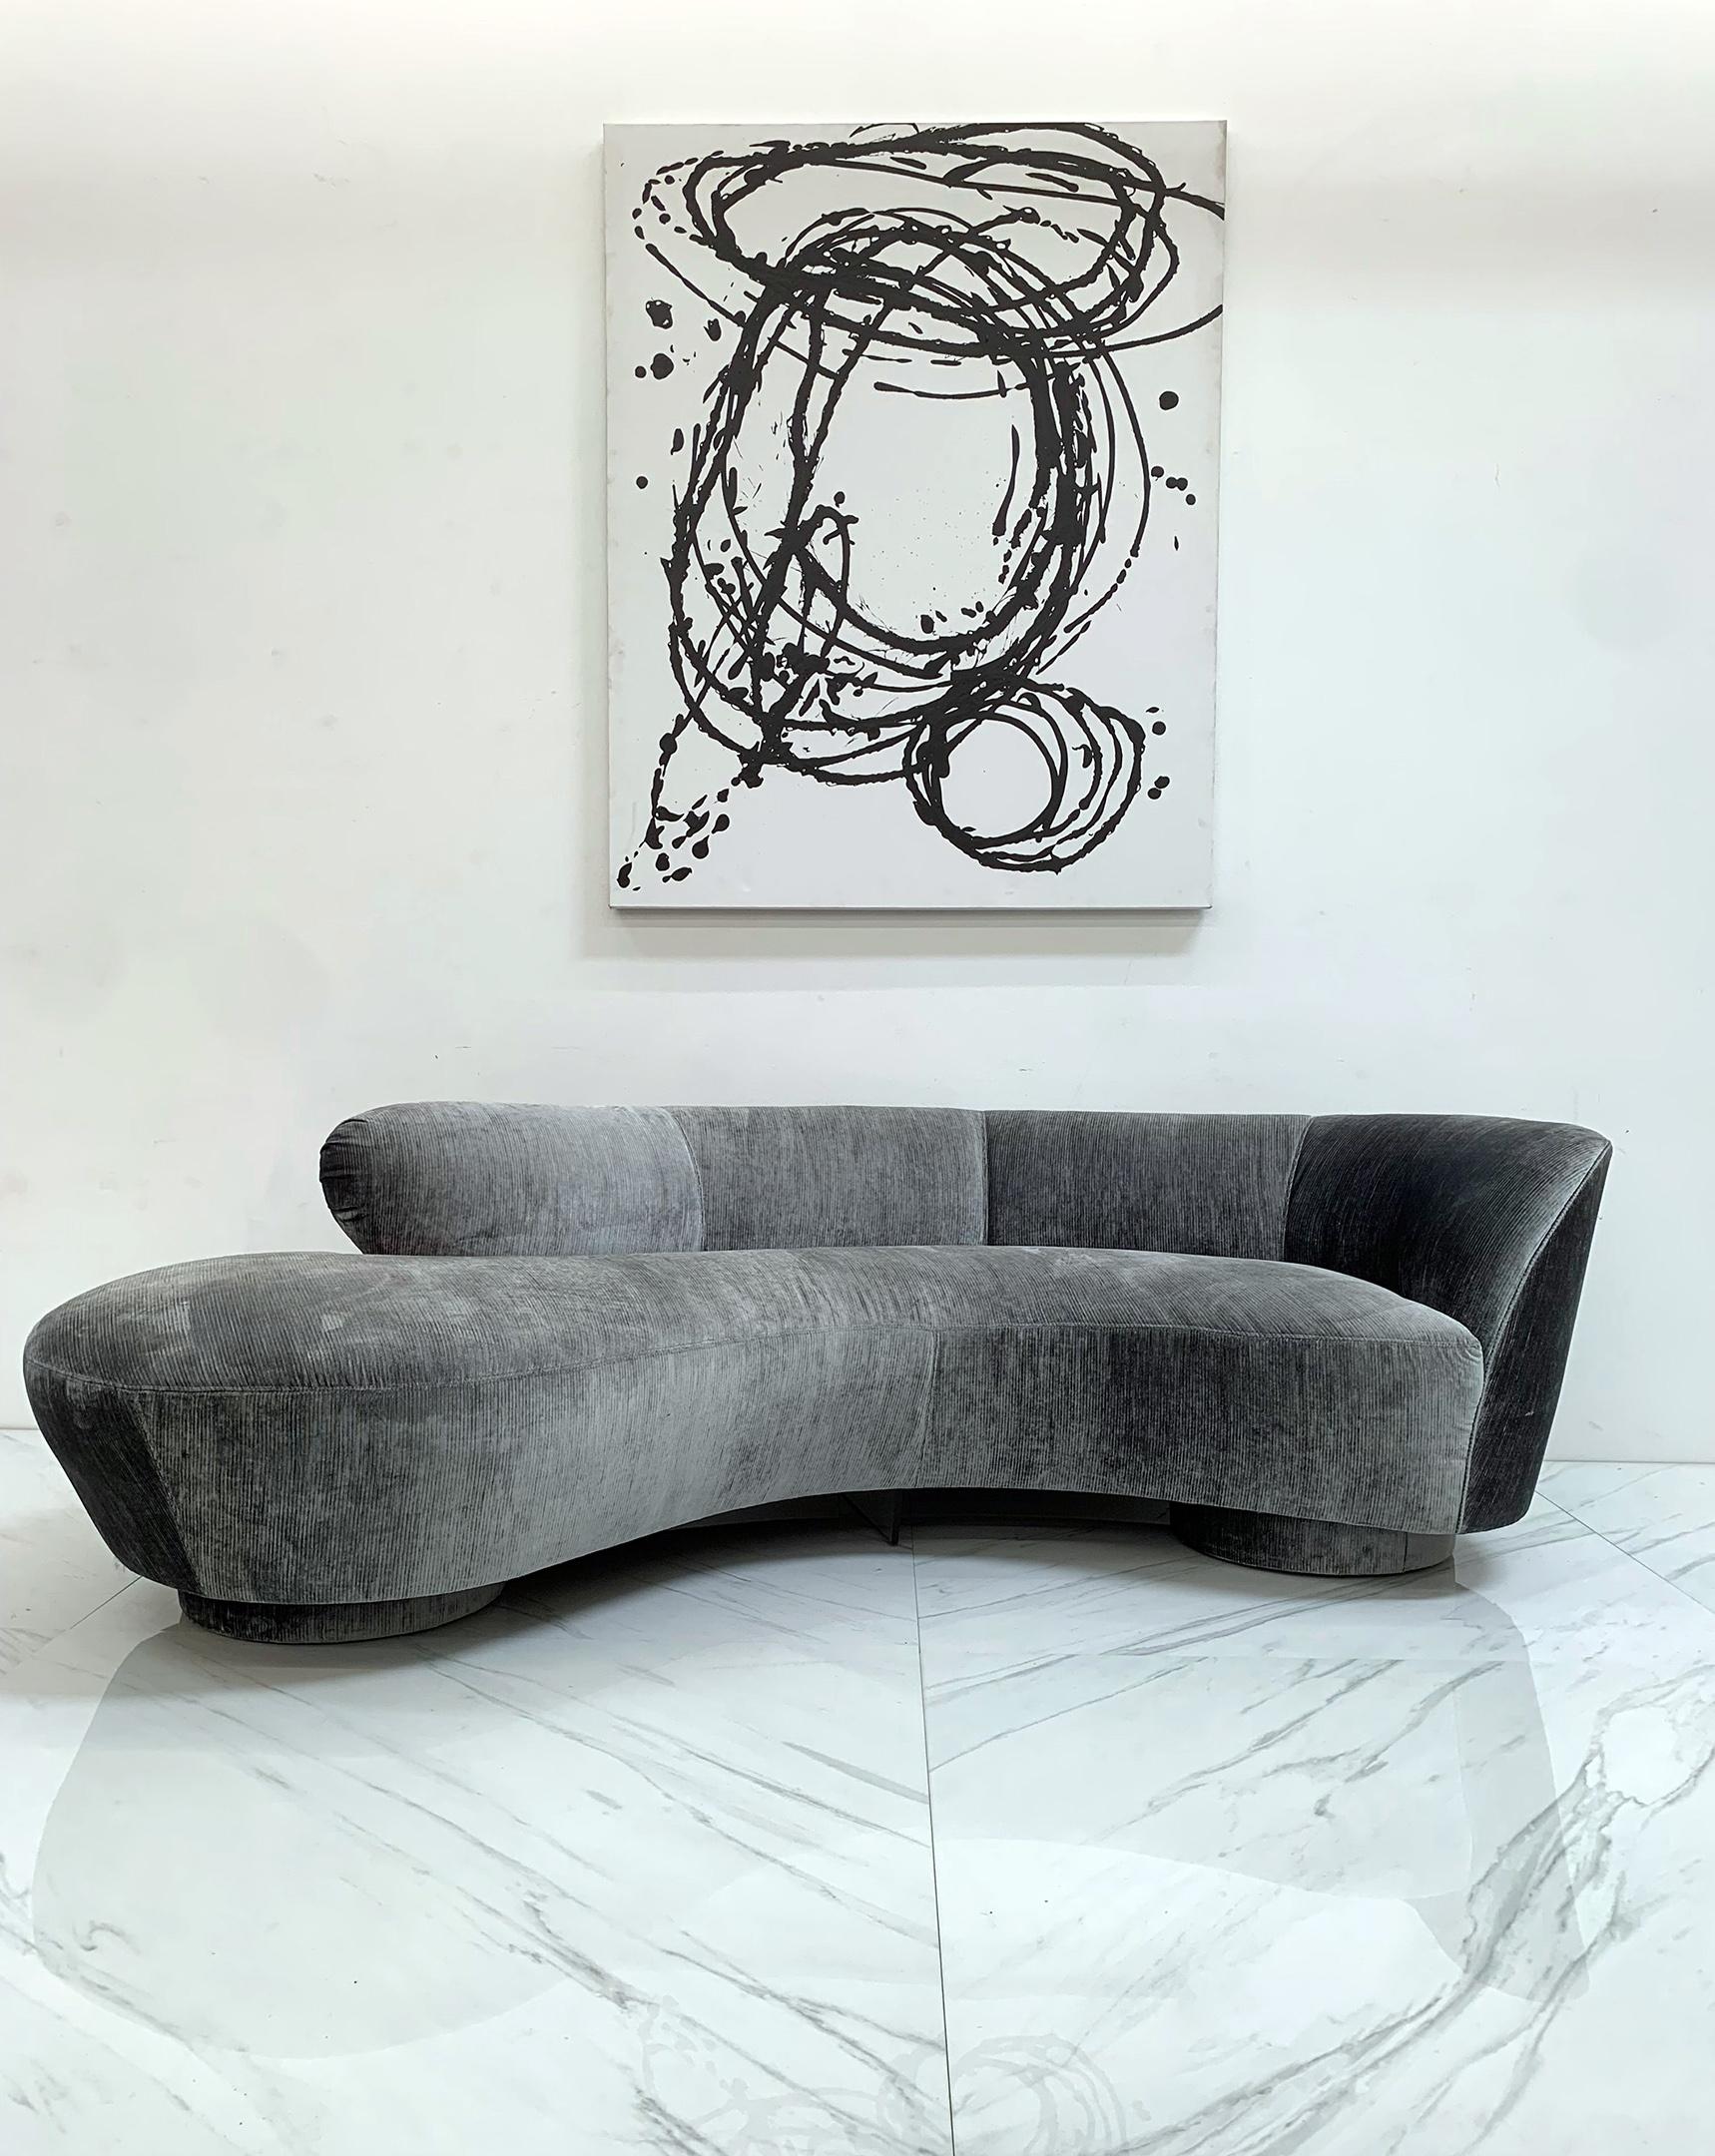 Designed by Vladimir Kagan in the early 1990's for Directional Furniture this Vladimir Kagan right arm serpentine cloud sofa is just gorgeous. Clad in a fine slate gray cotton chenille, this sofa is equal parts comfort, beauty and art. 

Vladimir